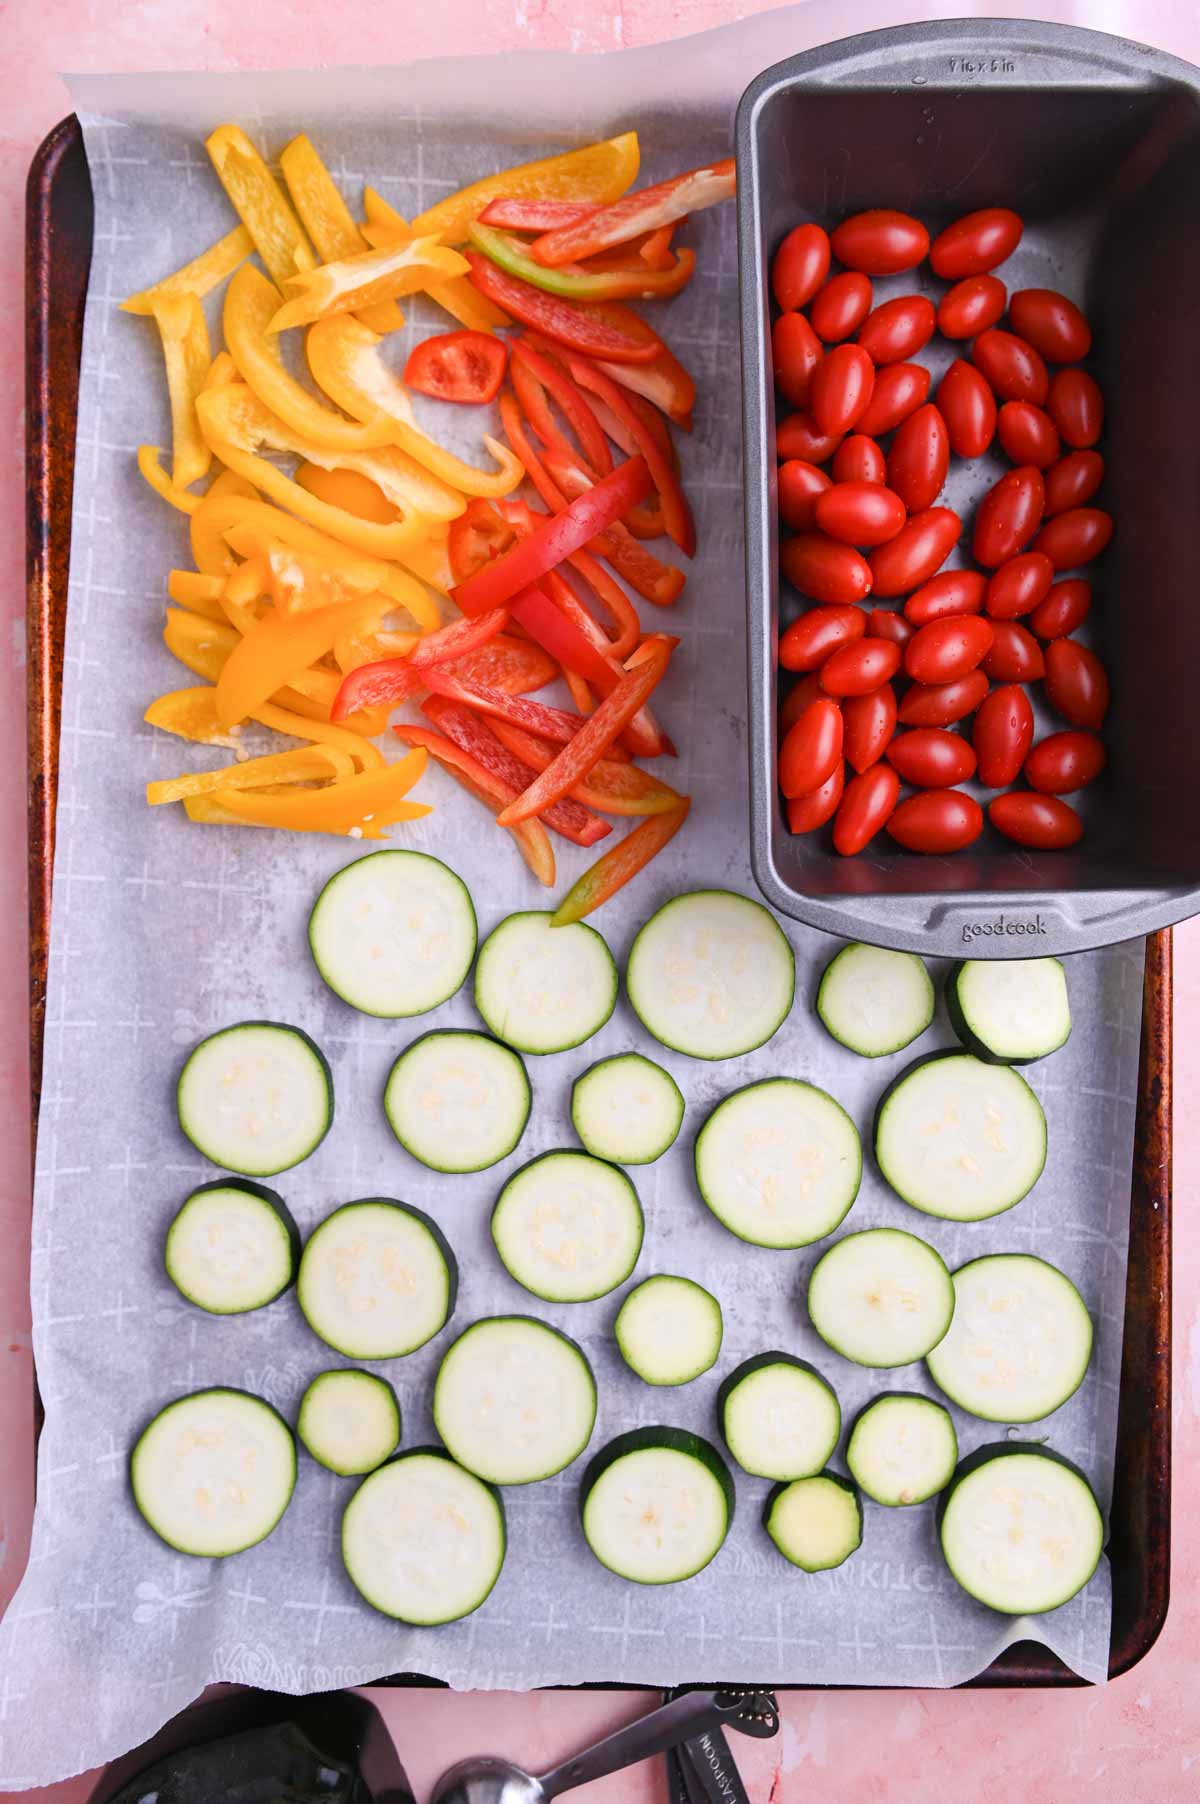 Uncooked zucchini, bell pepper, and tomatoes on a sheet pan.